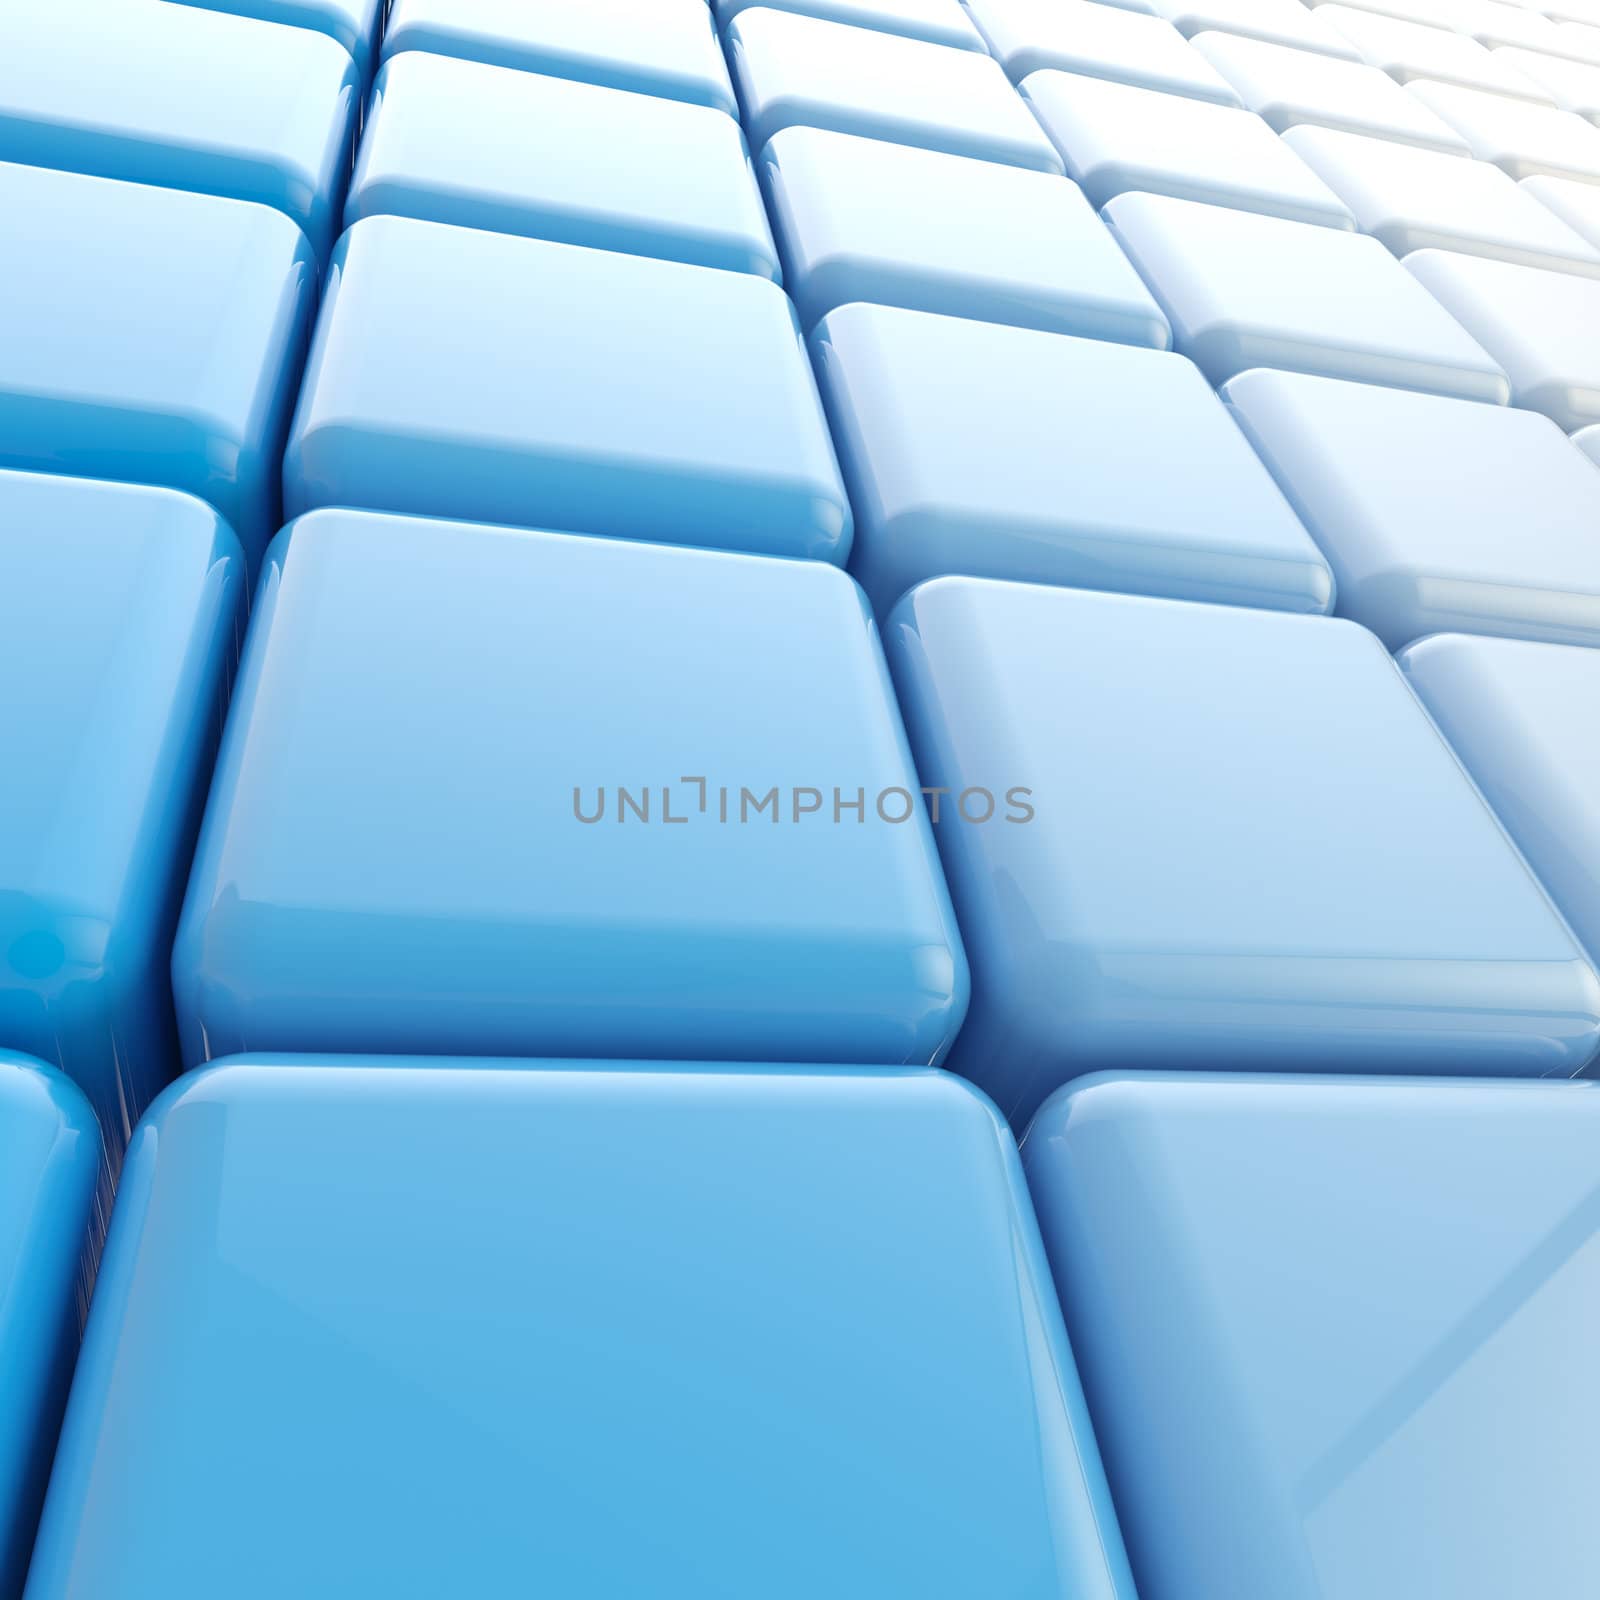 Abstract background made of blue cubes by nbvf